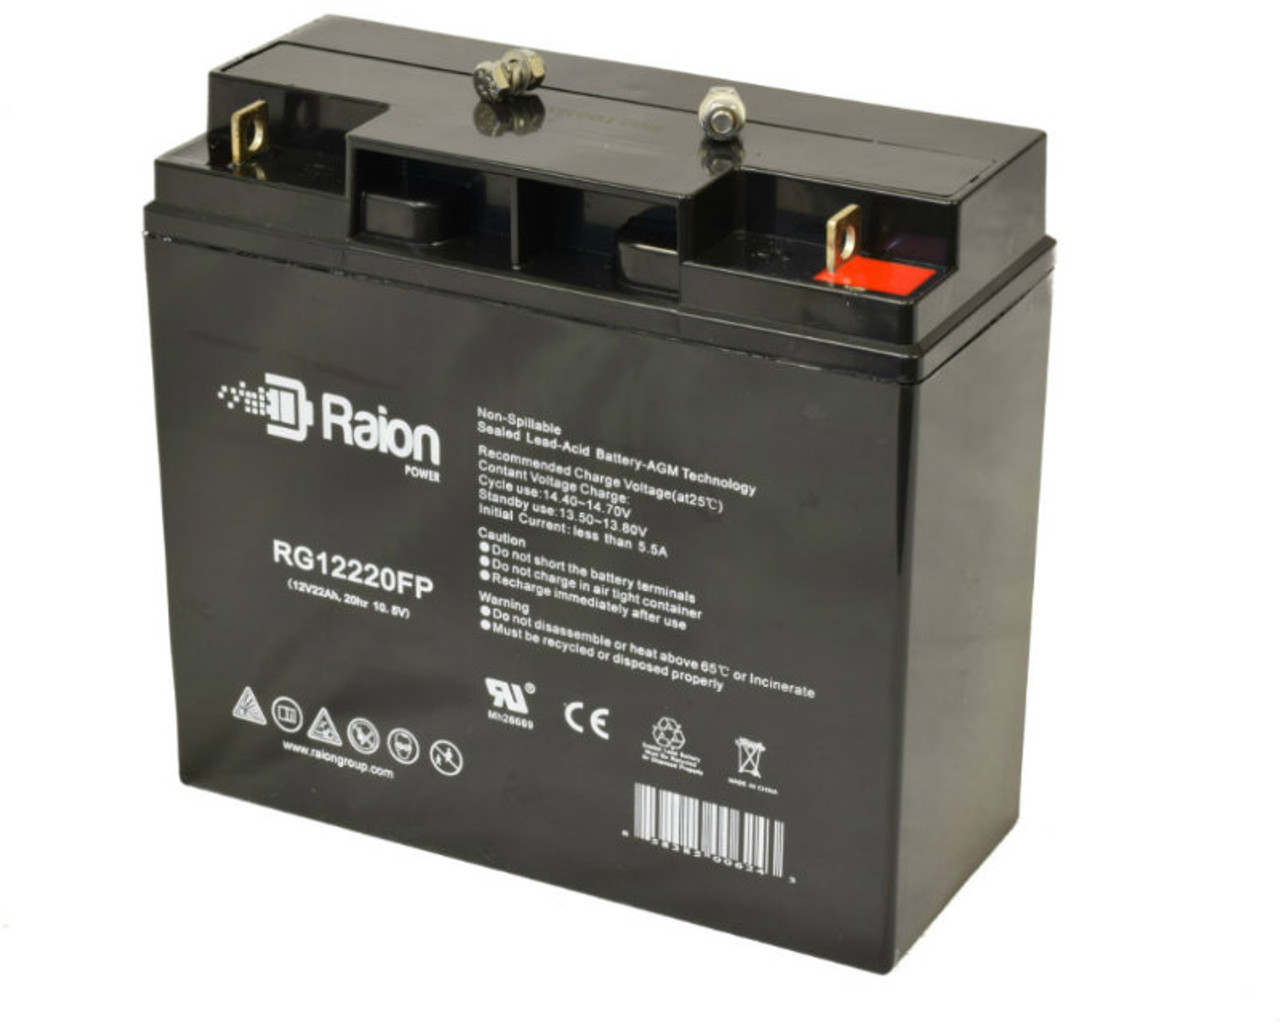 Raion Power Replacement 12V 22Ah Battery for Gaston GT12-22HR - 1 Pack